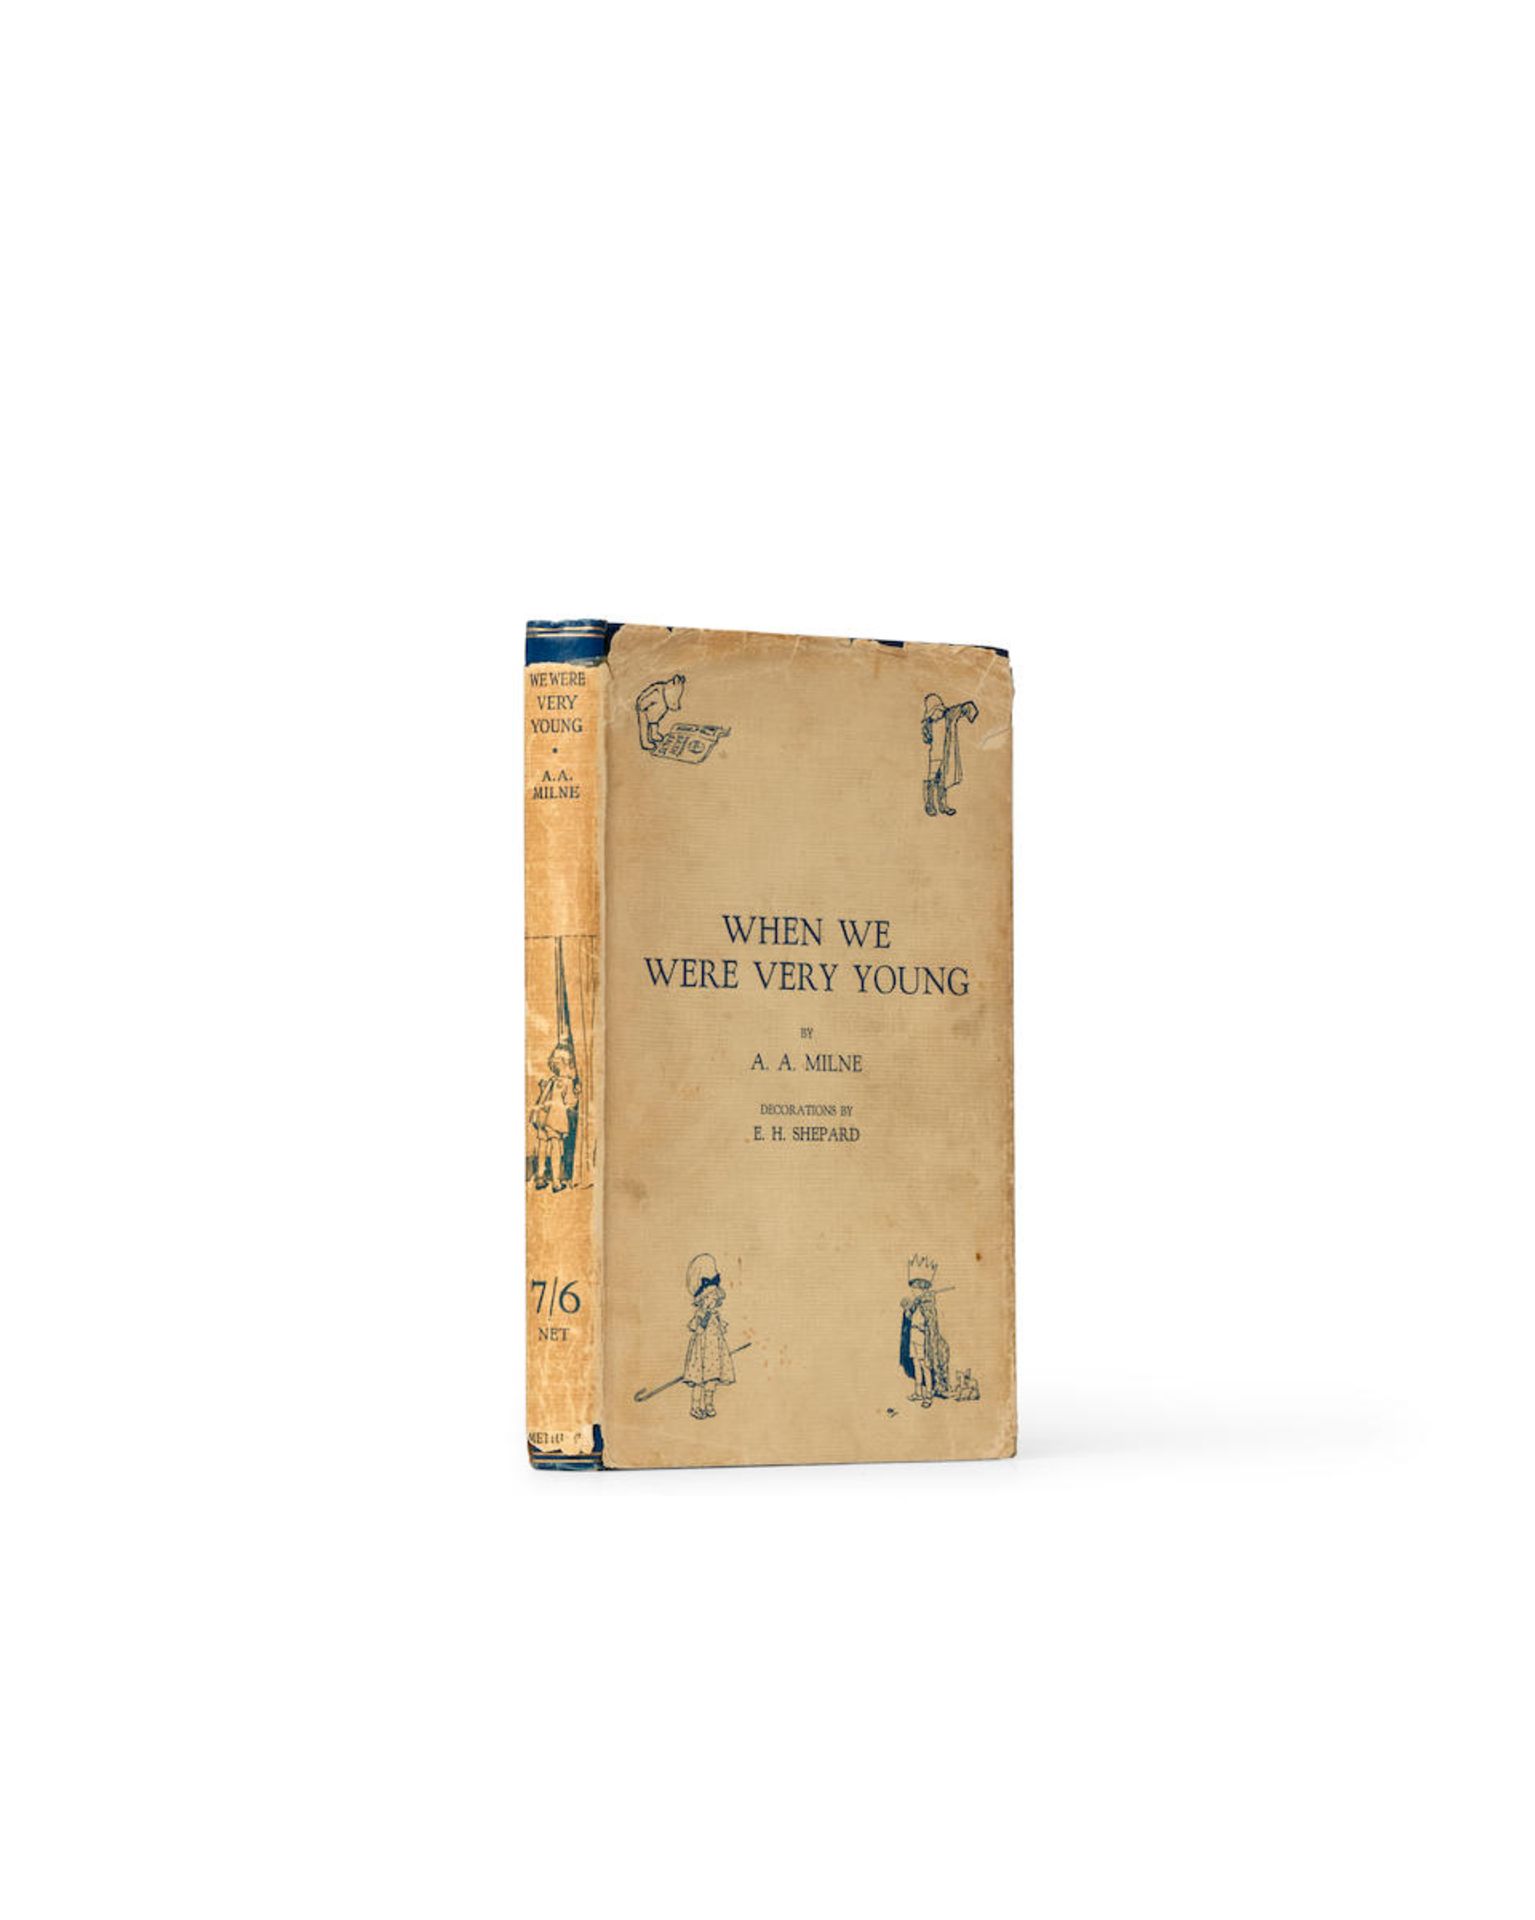 E.H. SHEPARD PRESENTATION COPY OF THE FIRST WINNIE-THE-POOH BOOK APPEARANCE. MILNE, A.A. & ERNES... - Image 2 of 2